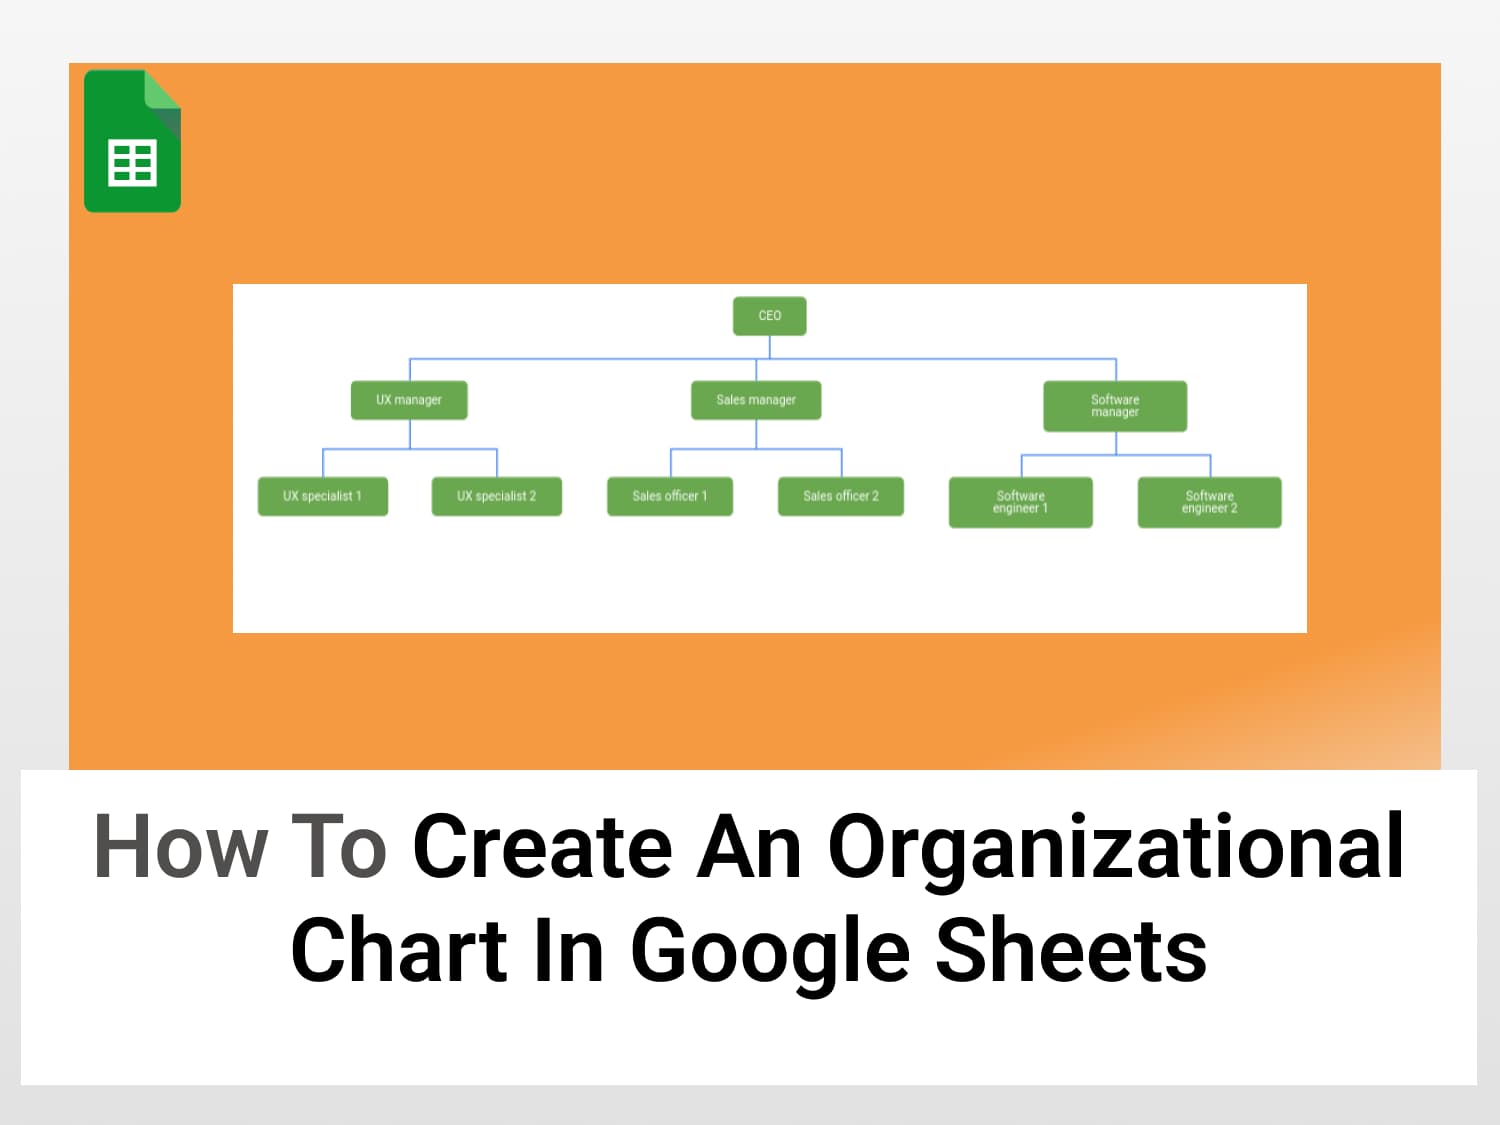 How to create an organizational chart in Google Sheets